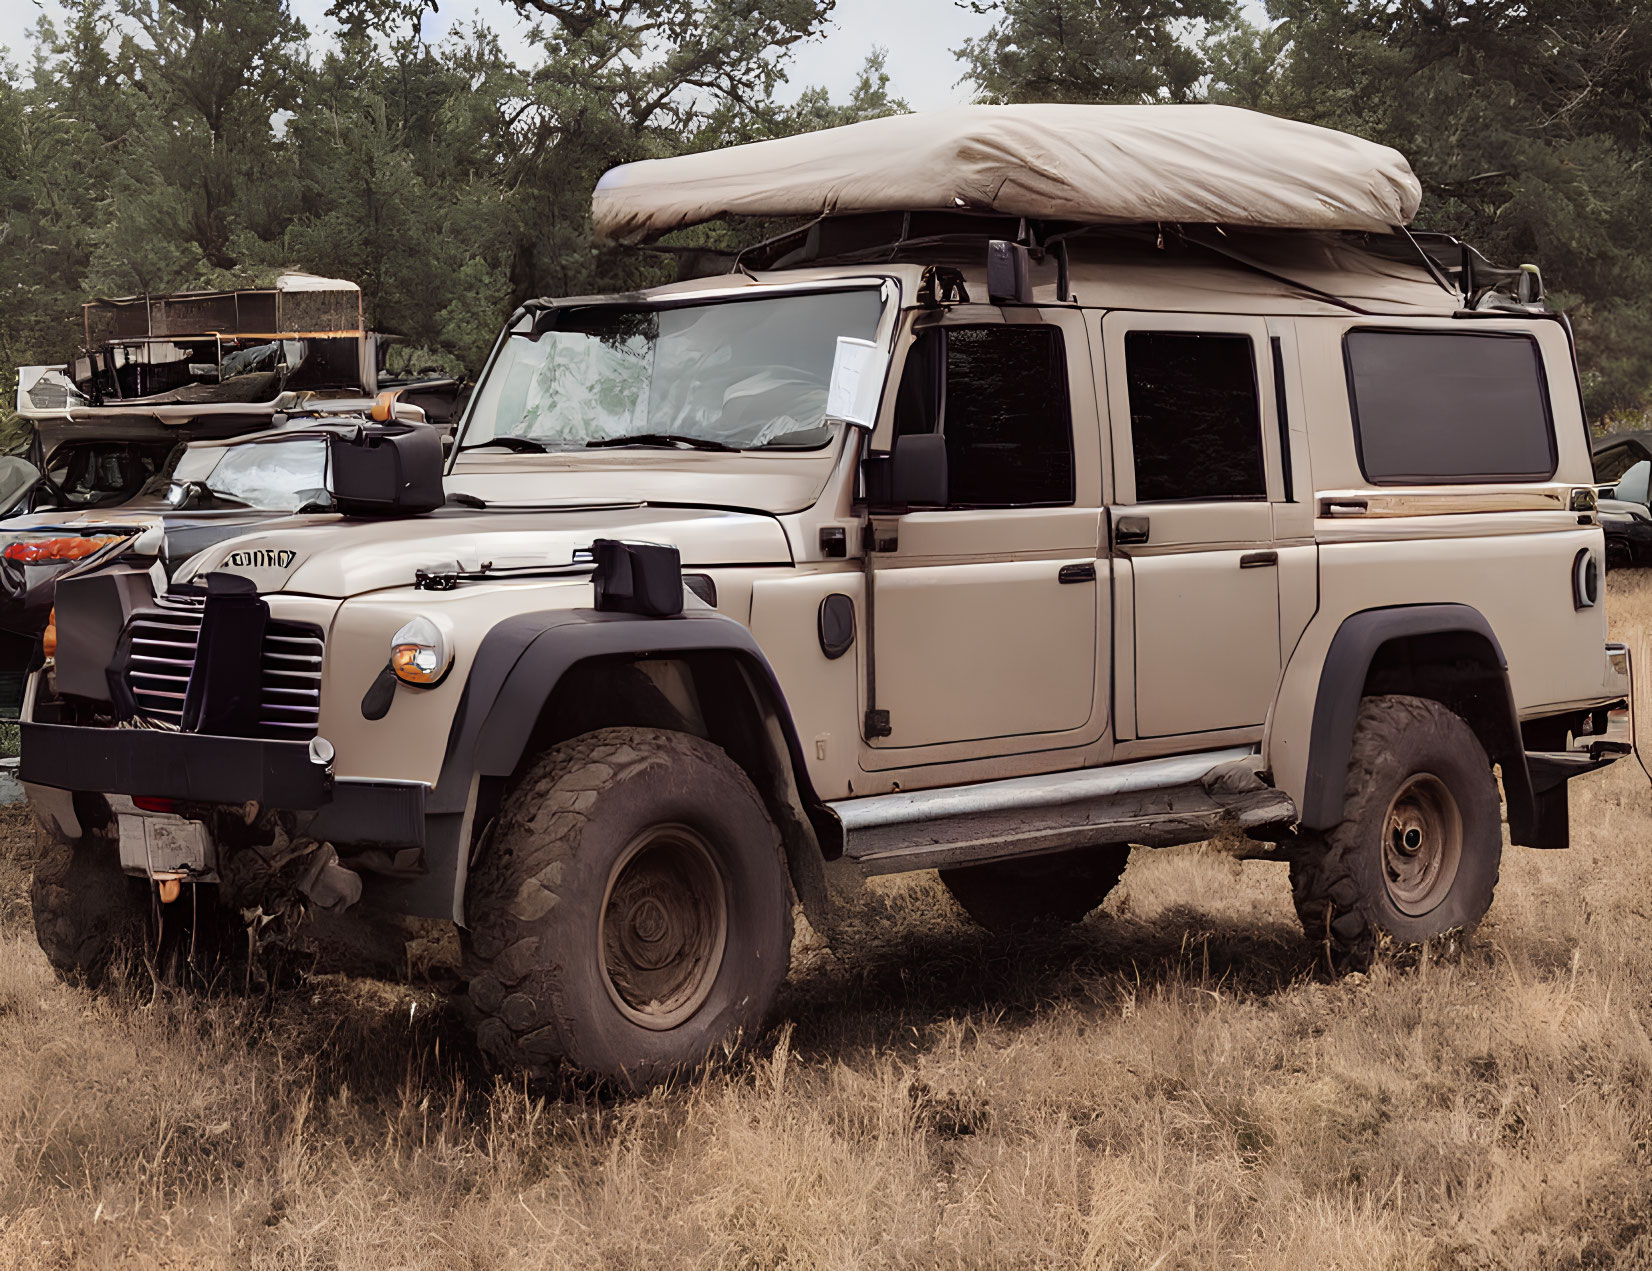 Beige off-road vehicle with roof tent in woodland setting